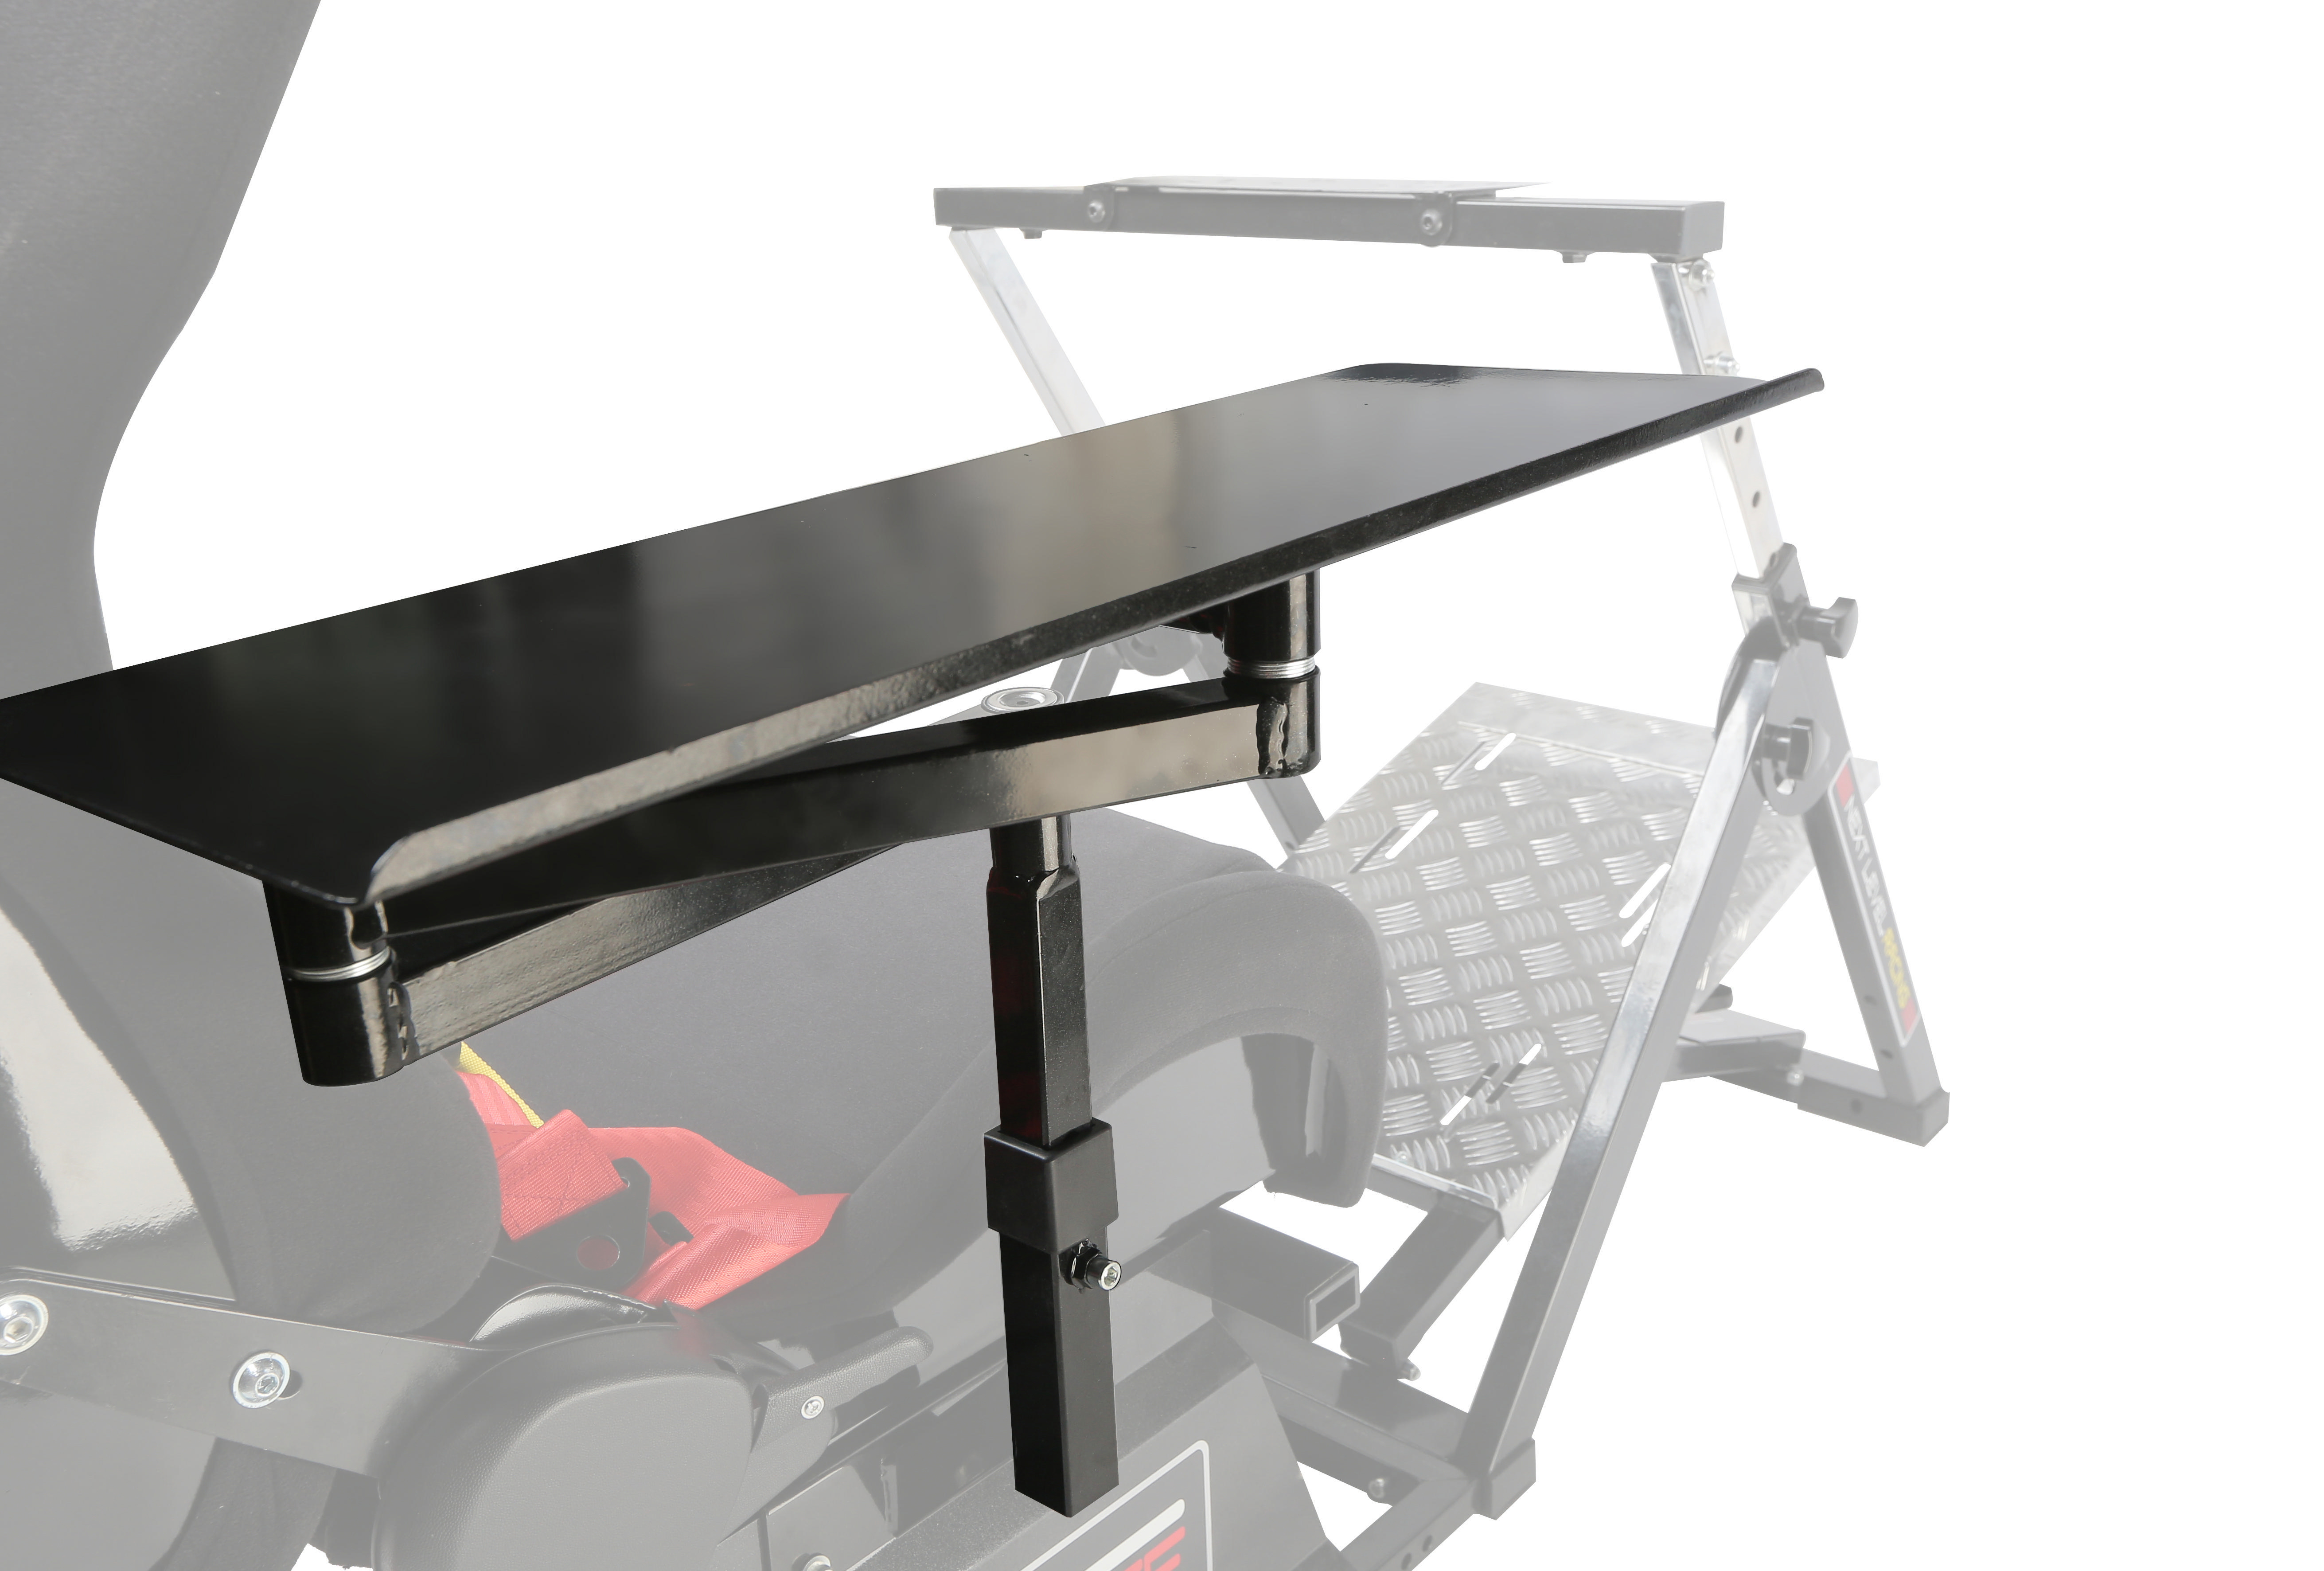 NEXT LEVEL RACING ® Free Standing Stand & Mouse Keyboard